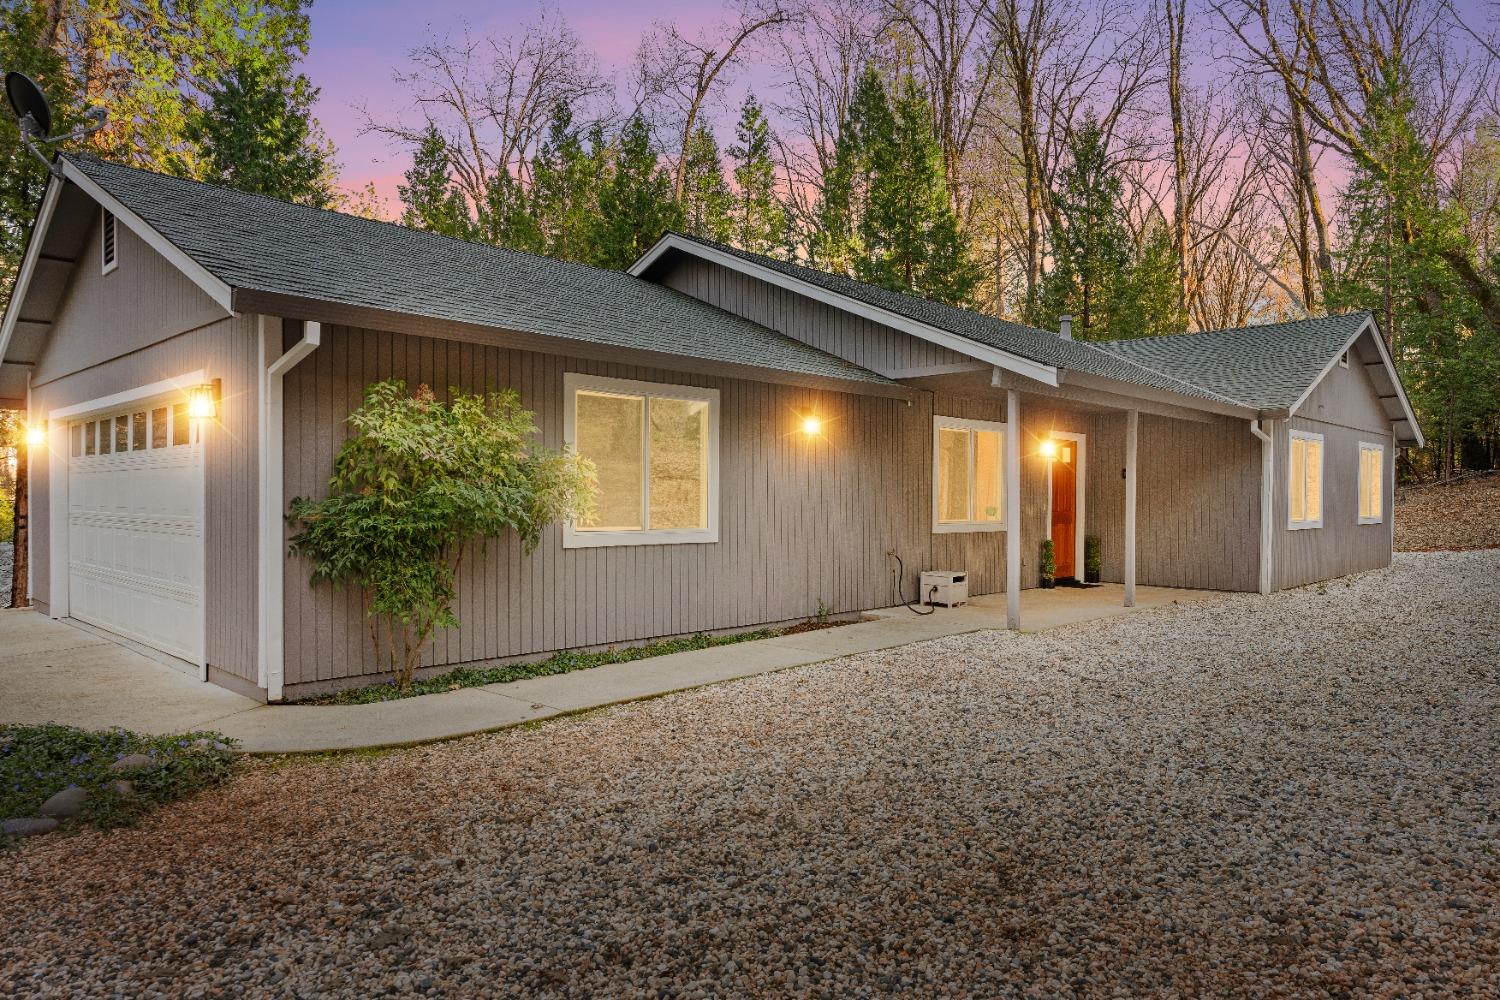 Photo of 13644 Edgewood Dr in Grass Valley, CA